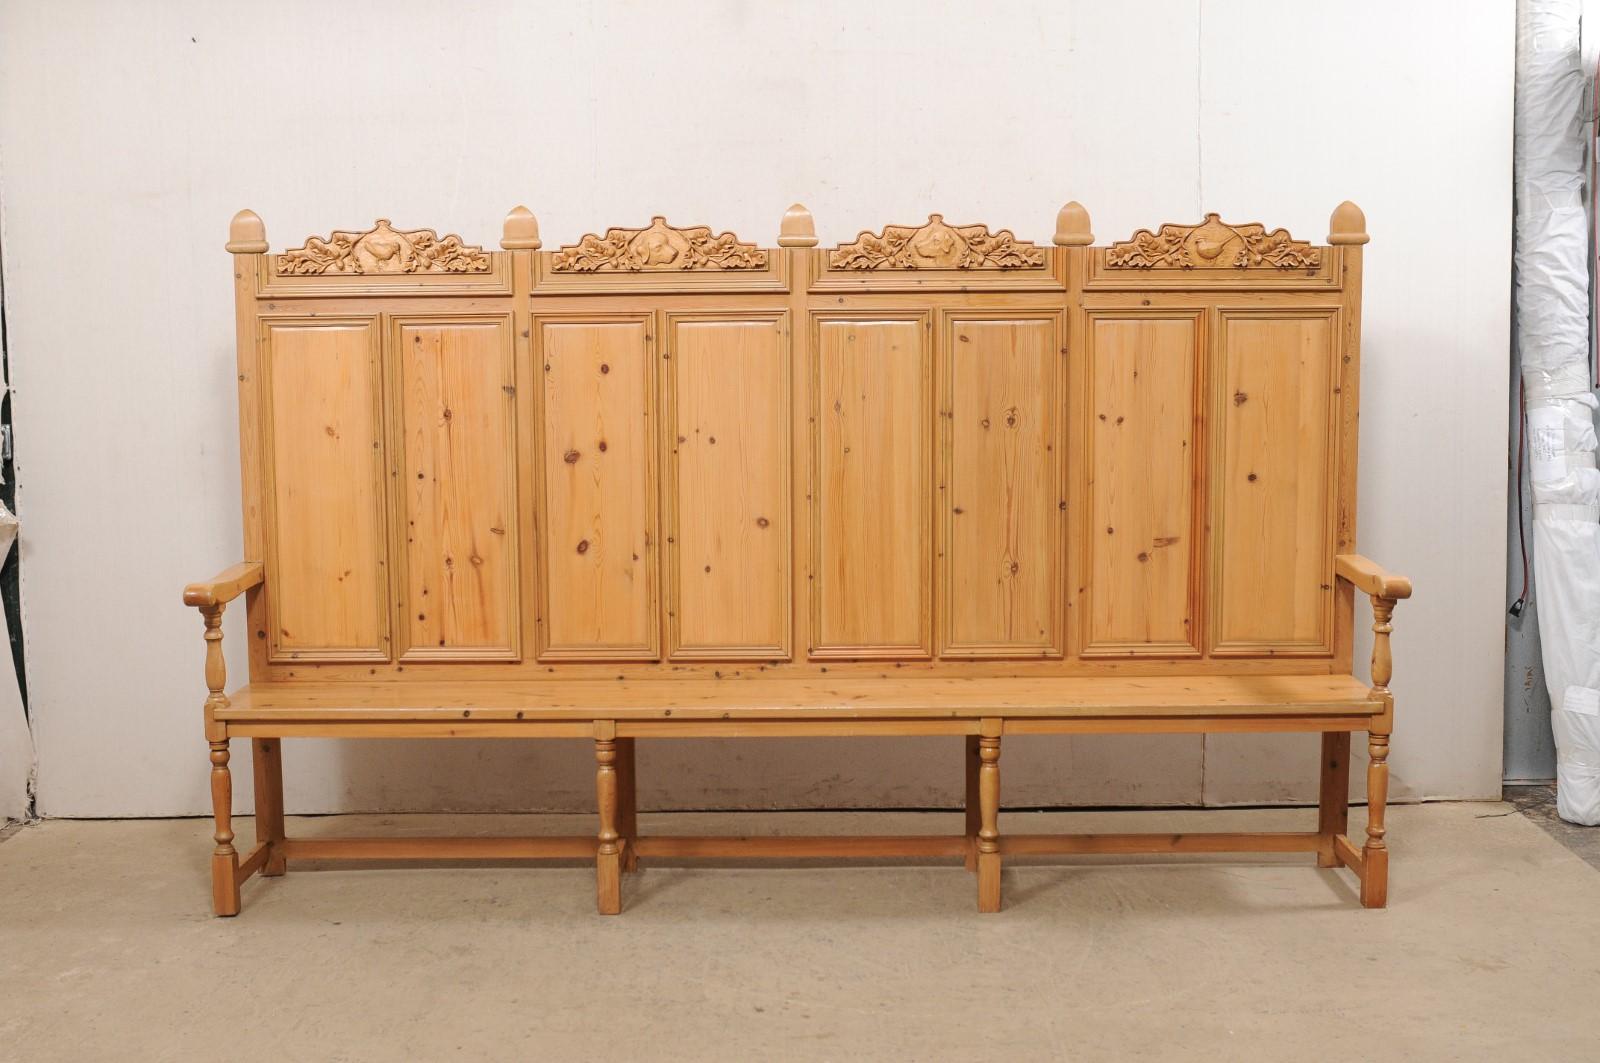 A large-scale English wood-carved hall bench with high back from the mid 20th century. This vintage bench from England is impressively sized at over 10 feet in length and back standing nearly 6 feet tall. The back features eight rectangular panels